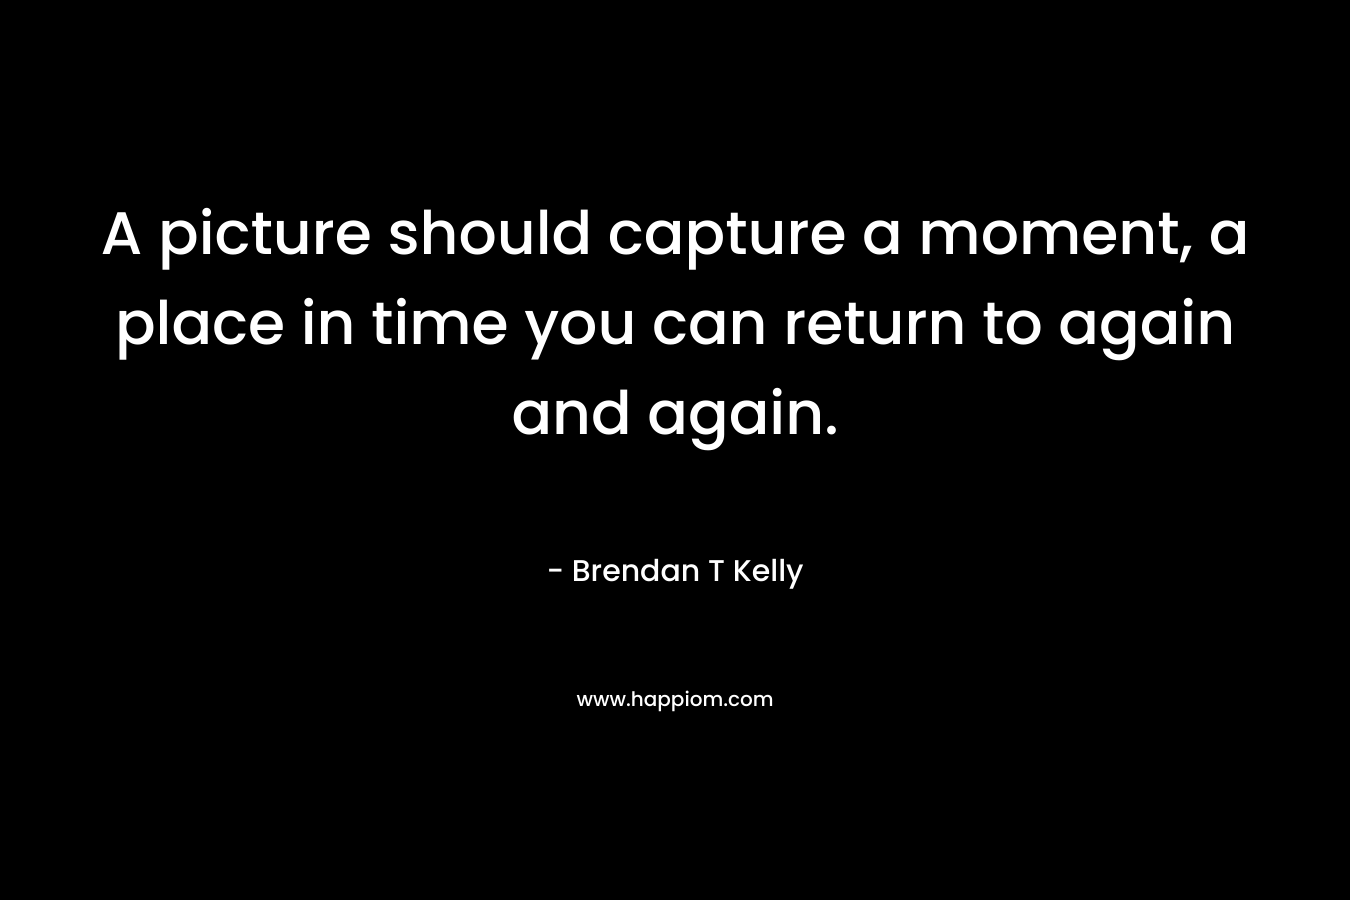 A picture should capture a moment, a place in time you can return to again and again.